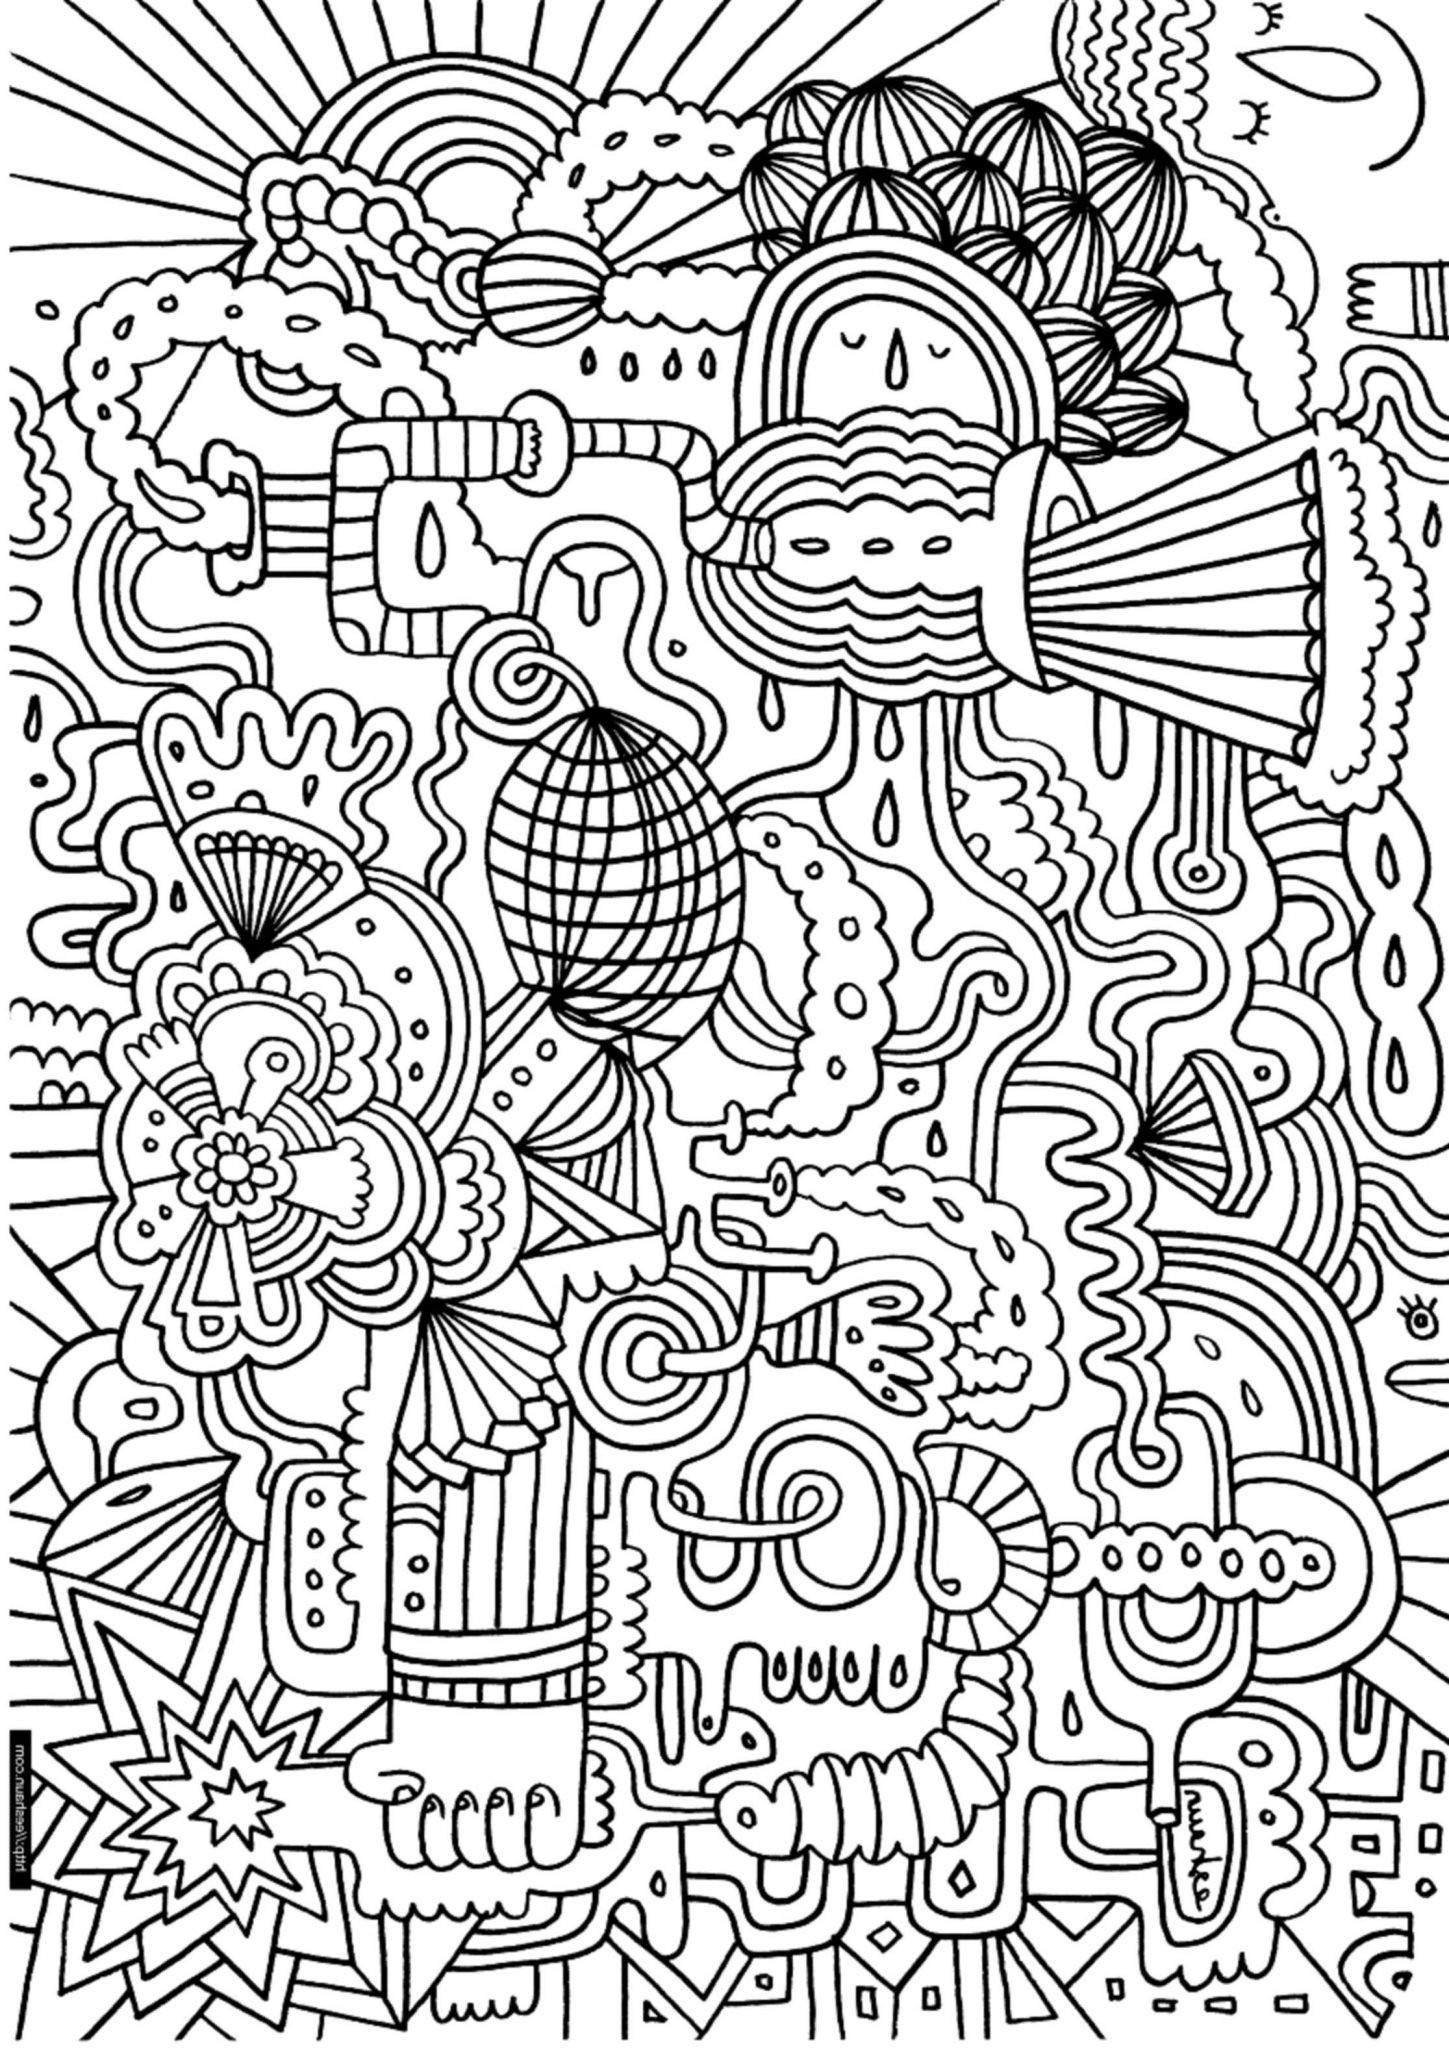 Download Coloring Pages For Kids
 Print & Download plex Coloring Pages for Kids and Adults